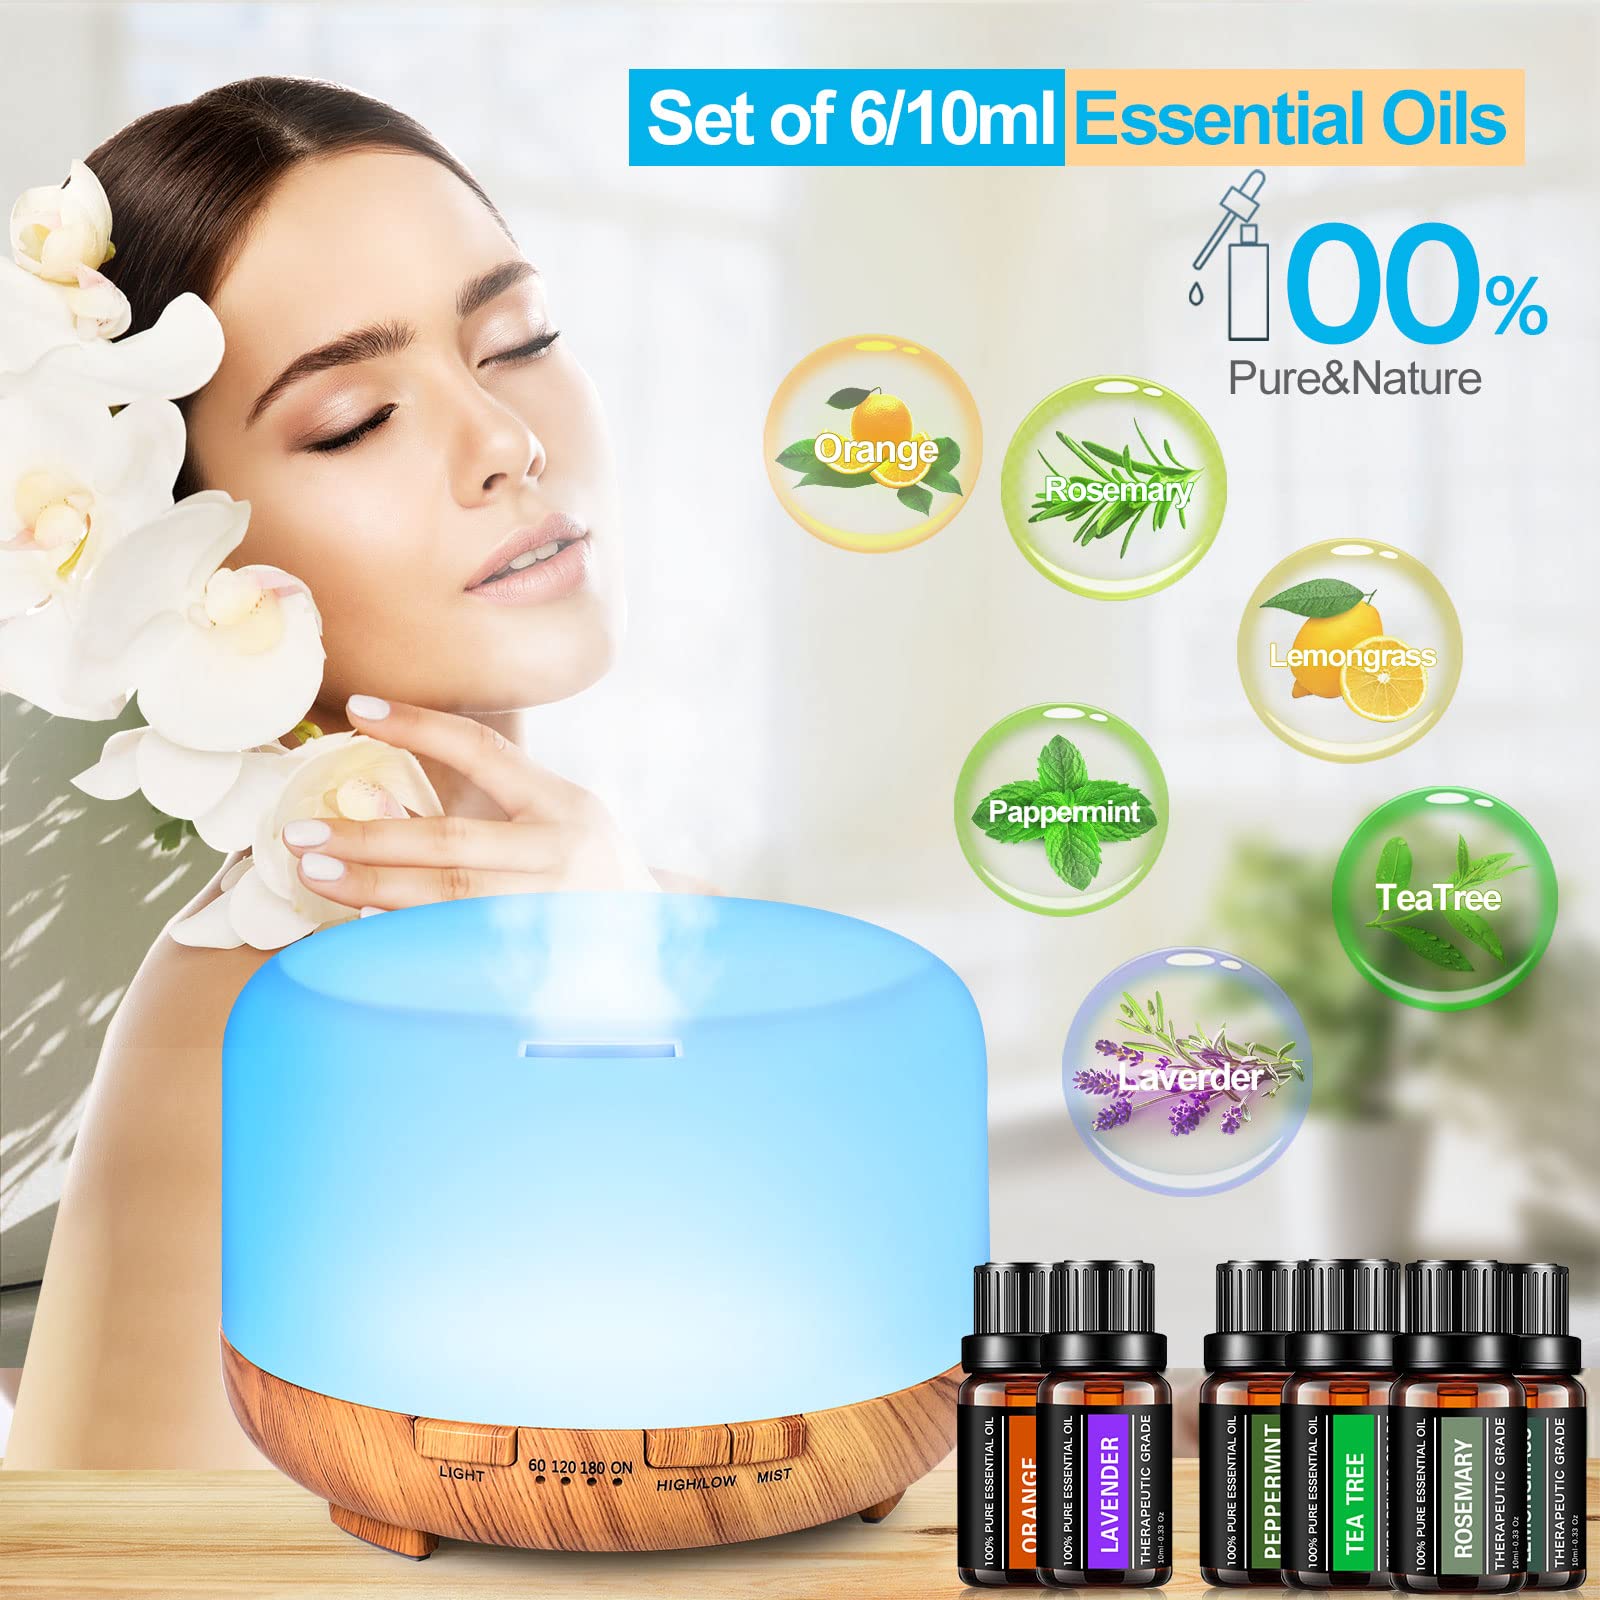 YIKUBEE Oil Diffuser with Essential Oils Set, 500ml Essential Oil Diffuser, 6x10mL Essential Oils for diffusers for Home, Aromat